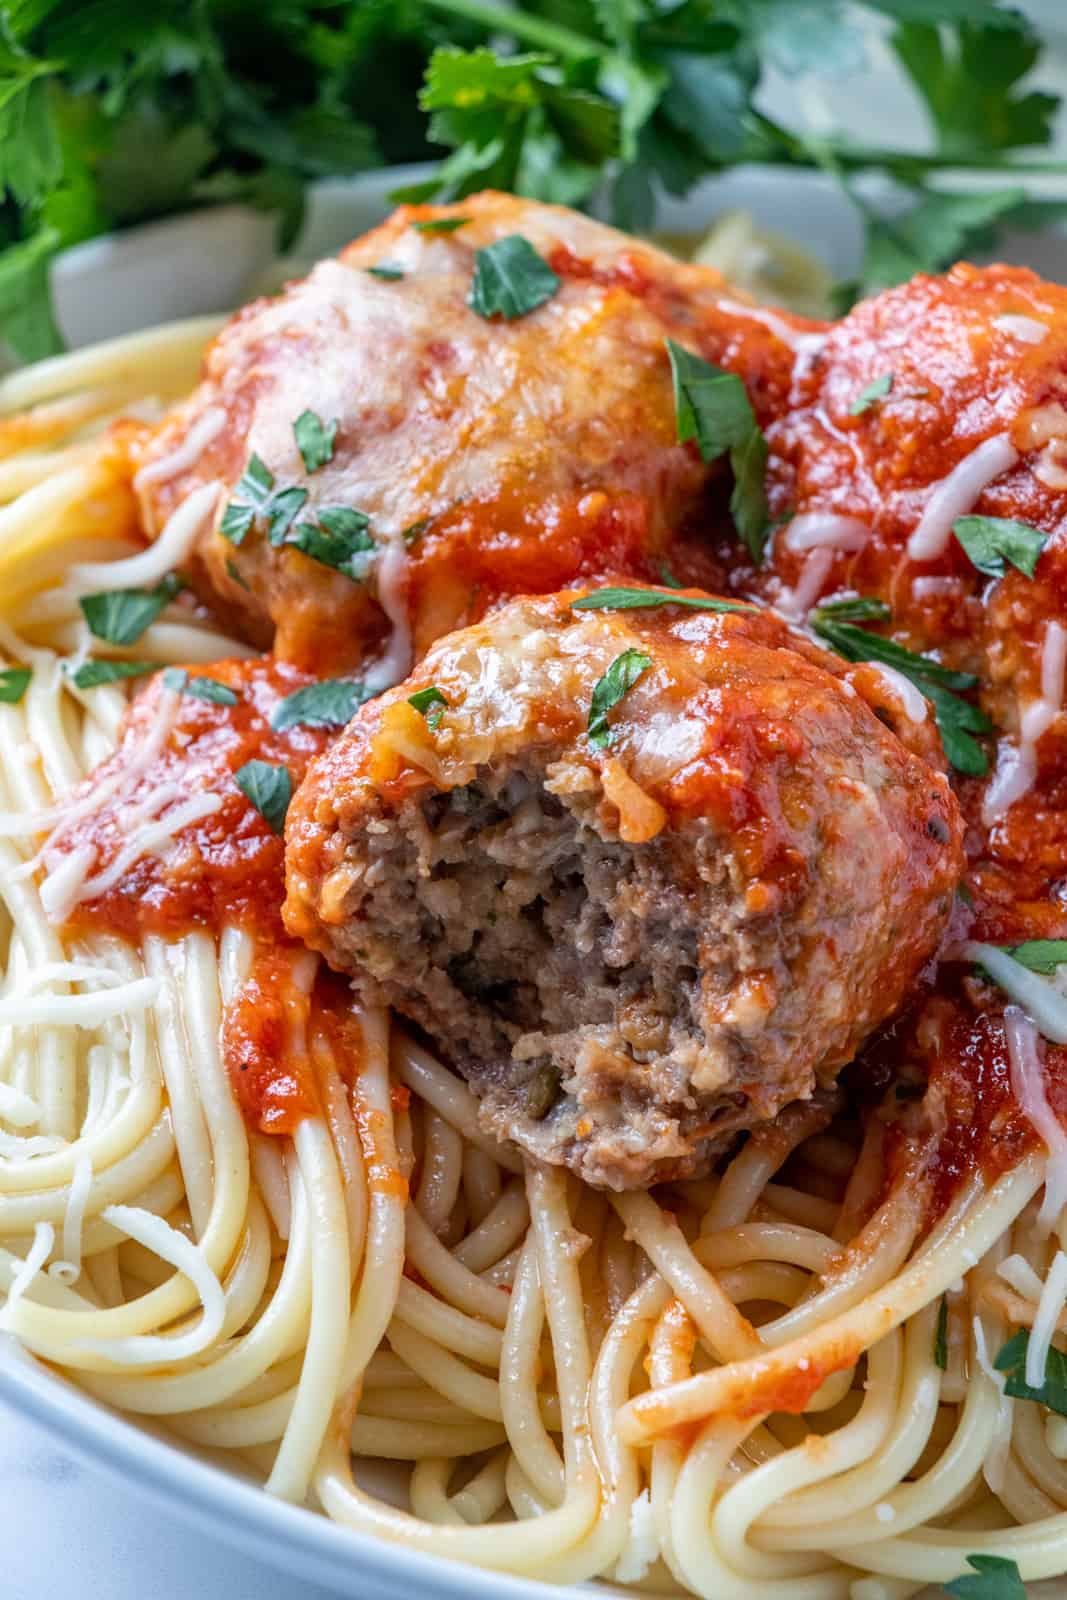 Close up photo of a bite taken out of one meatball